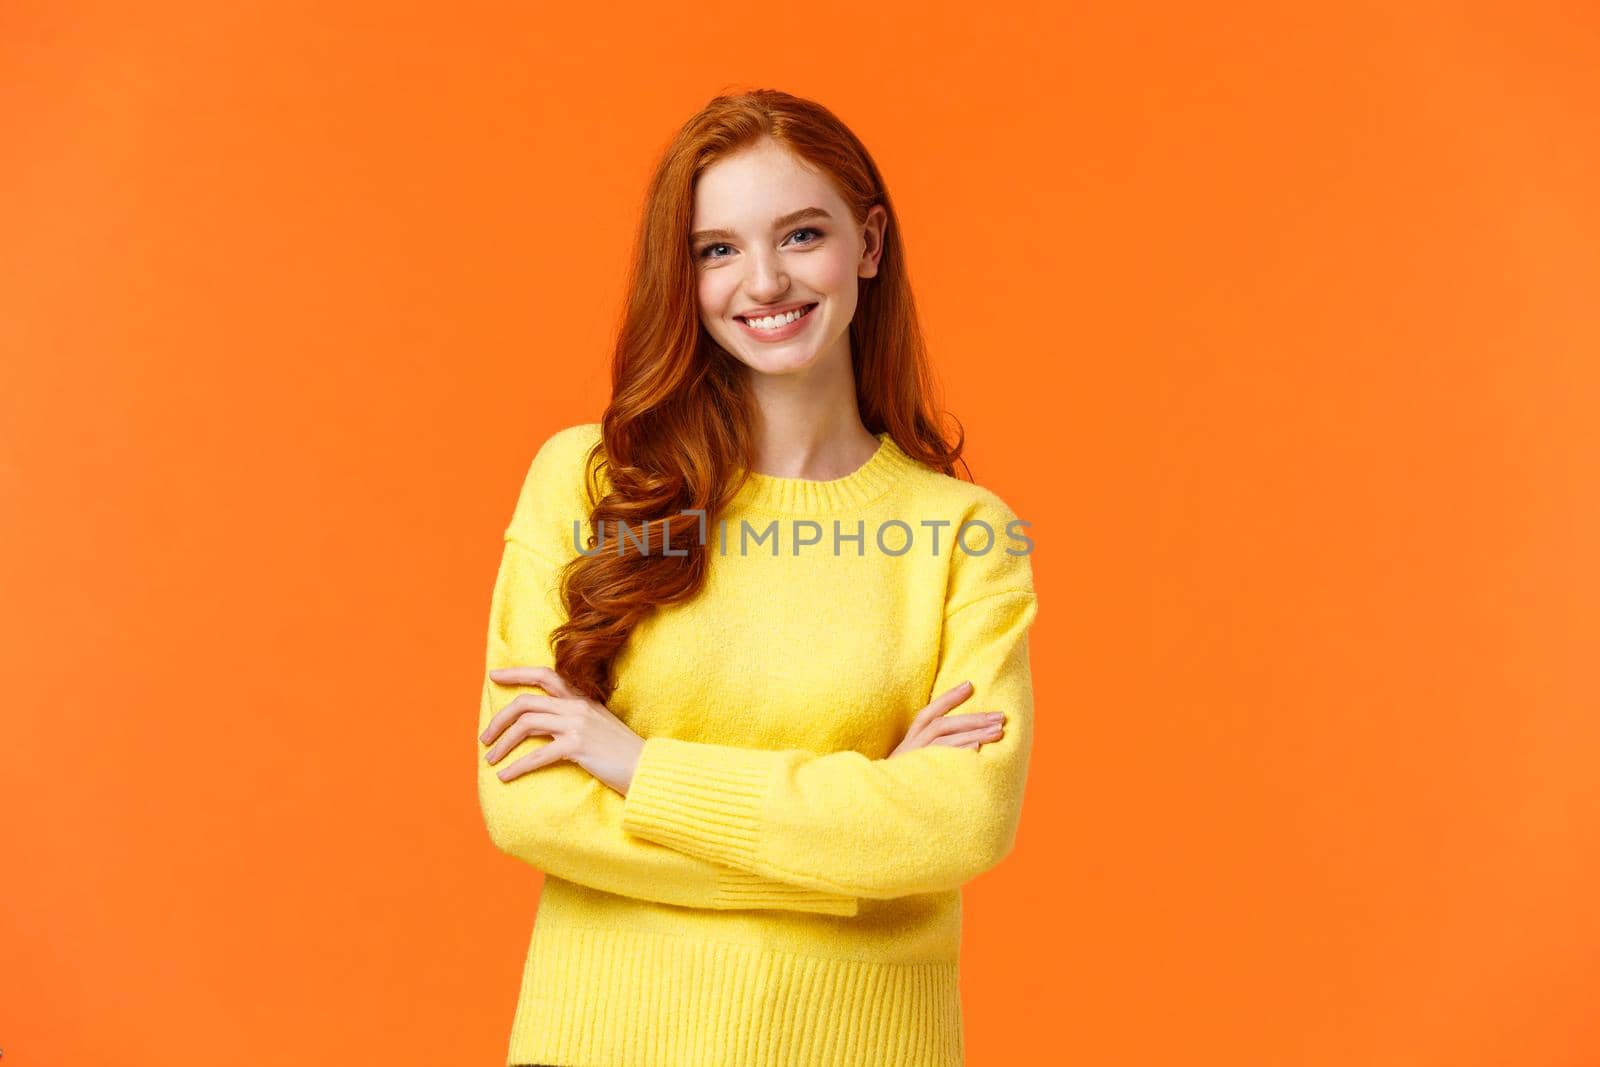 Holidays, people and winter concept. Attractive young smiling girl with red hair in yellow sweater standing in powerful, confident posture, grinning camera, cross arms over chest, orange background.